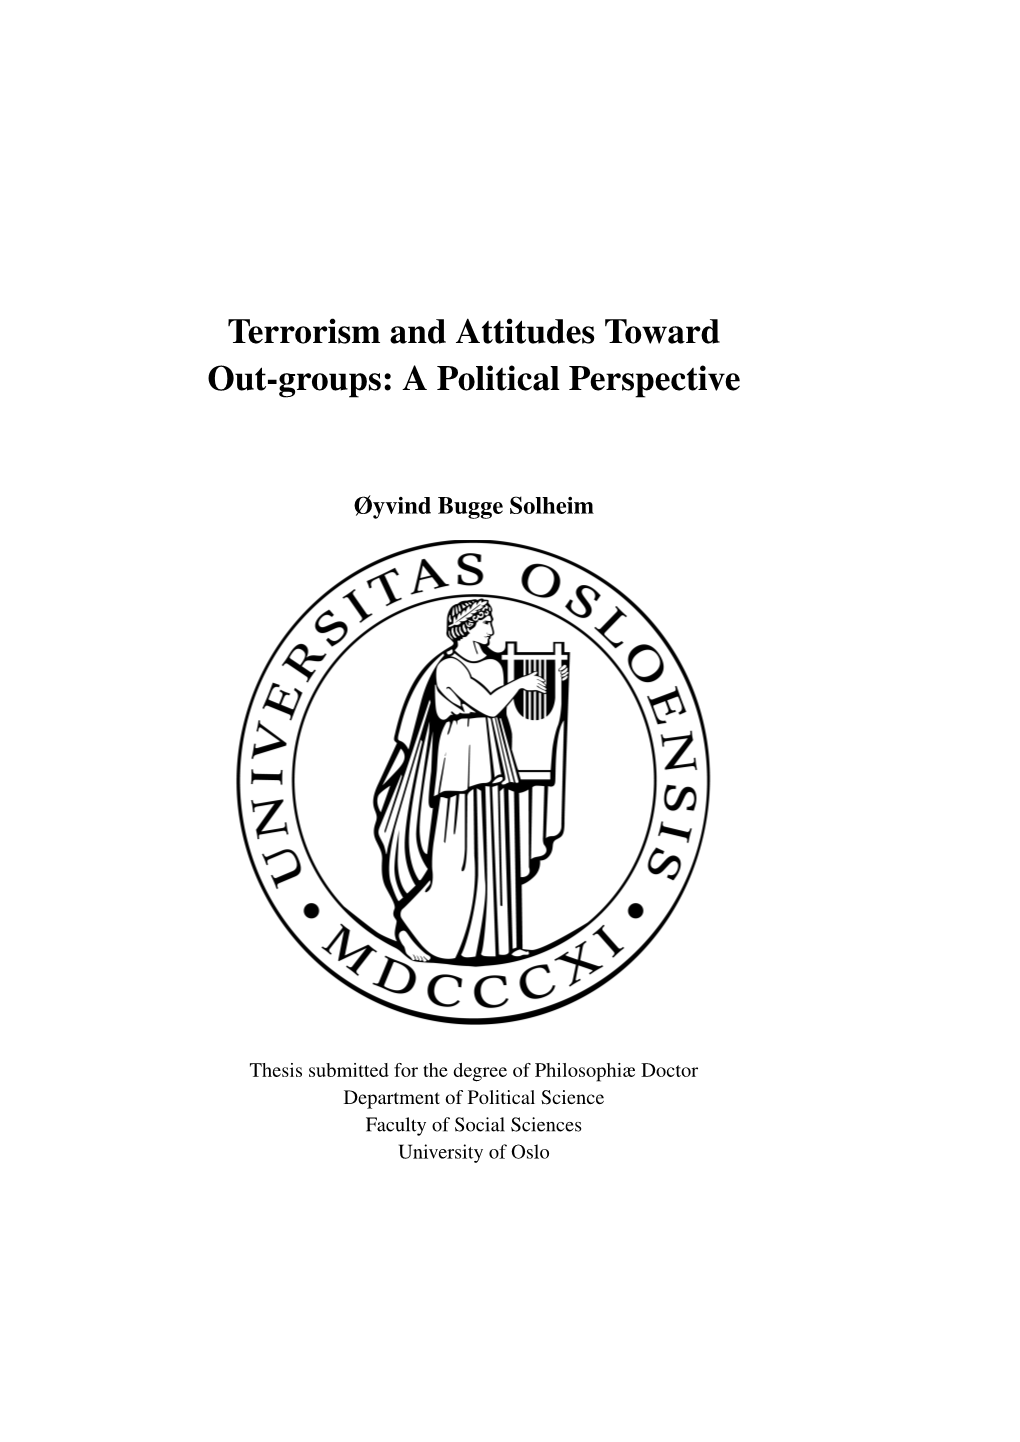 Terrorism and Attitudes Toward Out-Groups: a Political Perspective